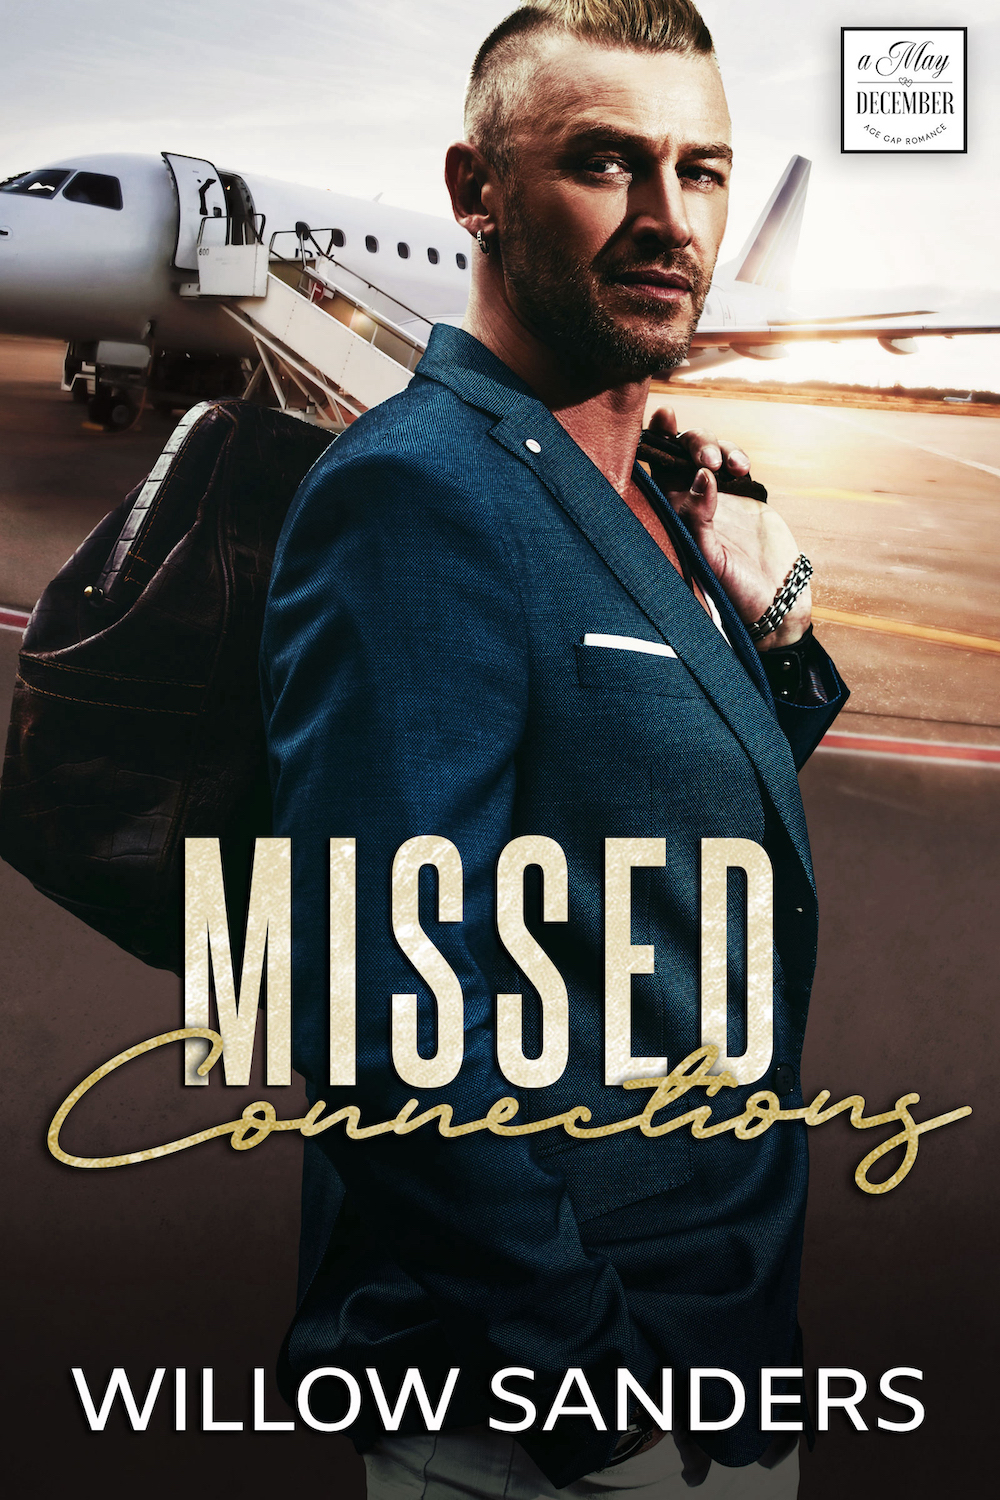 Missed Connections by Willow Sanders